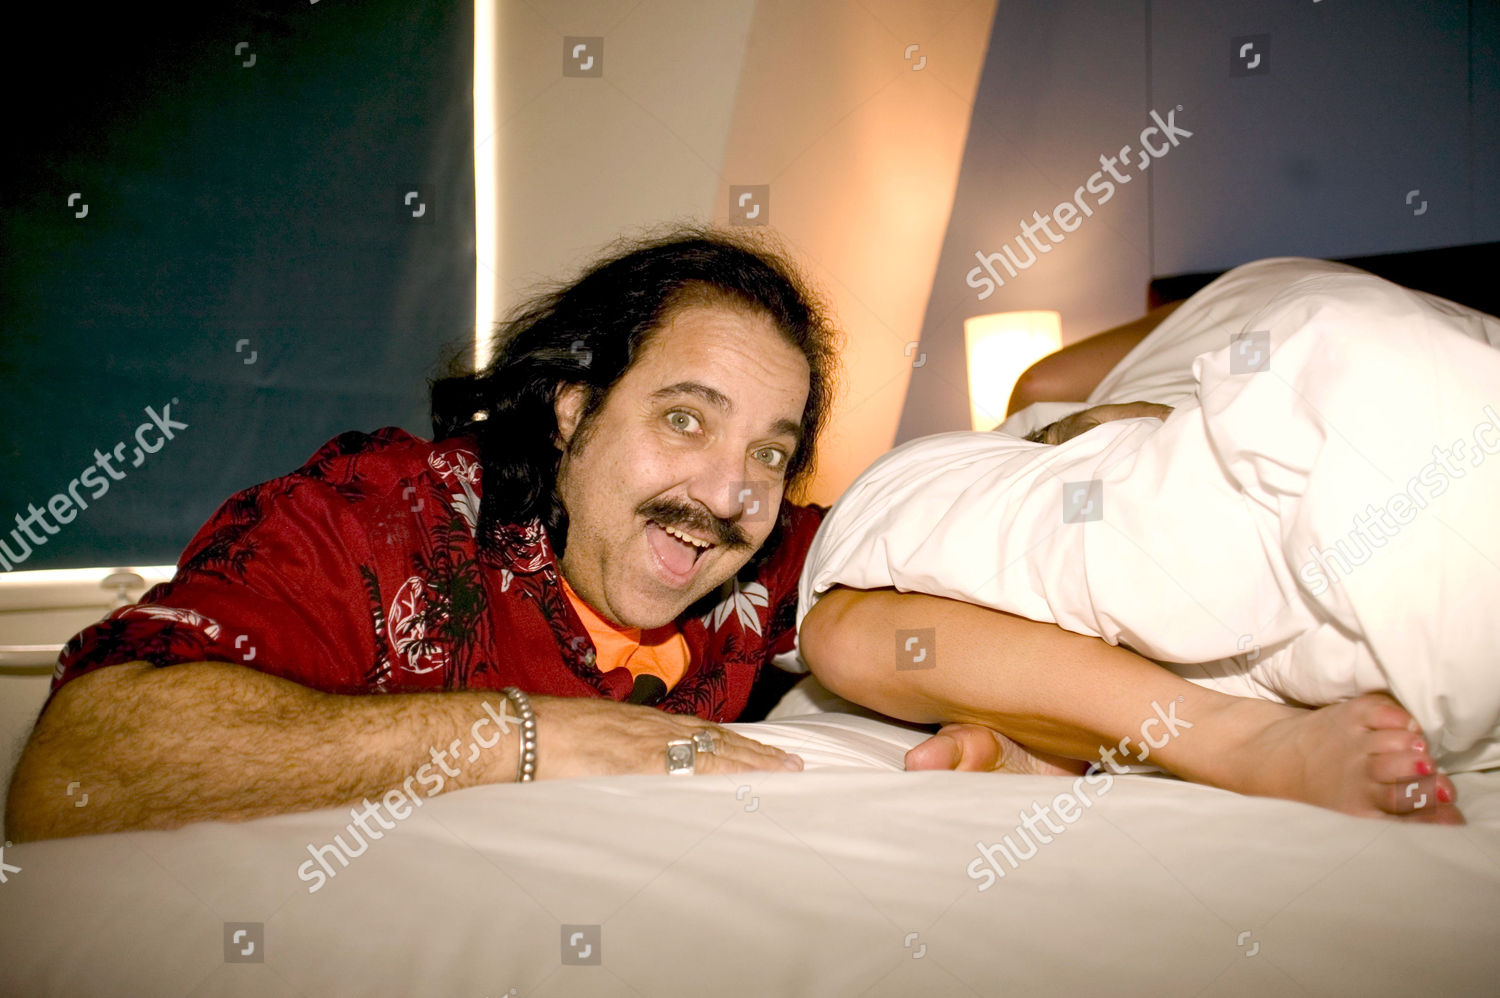 Ron jeremy best pill make a real big dick